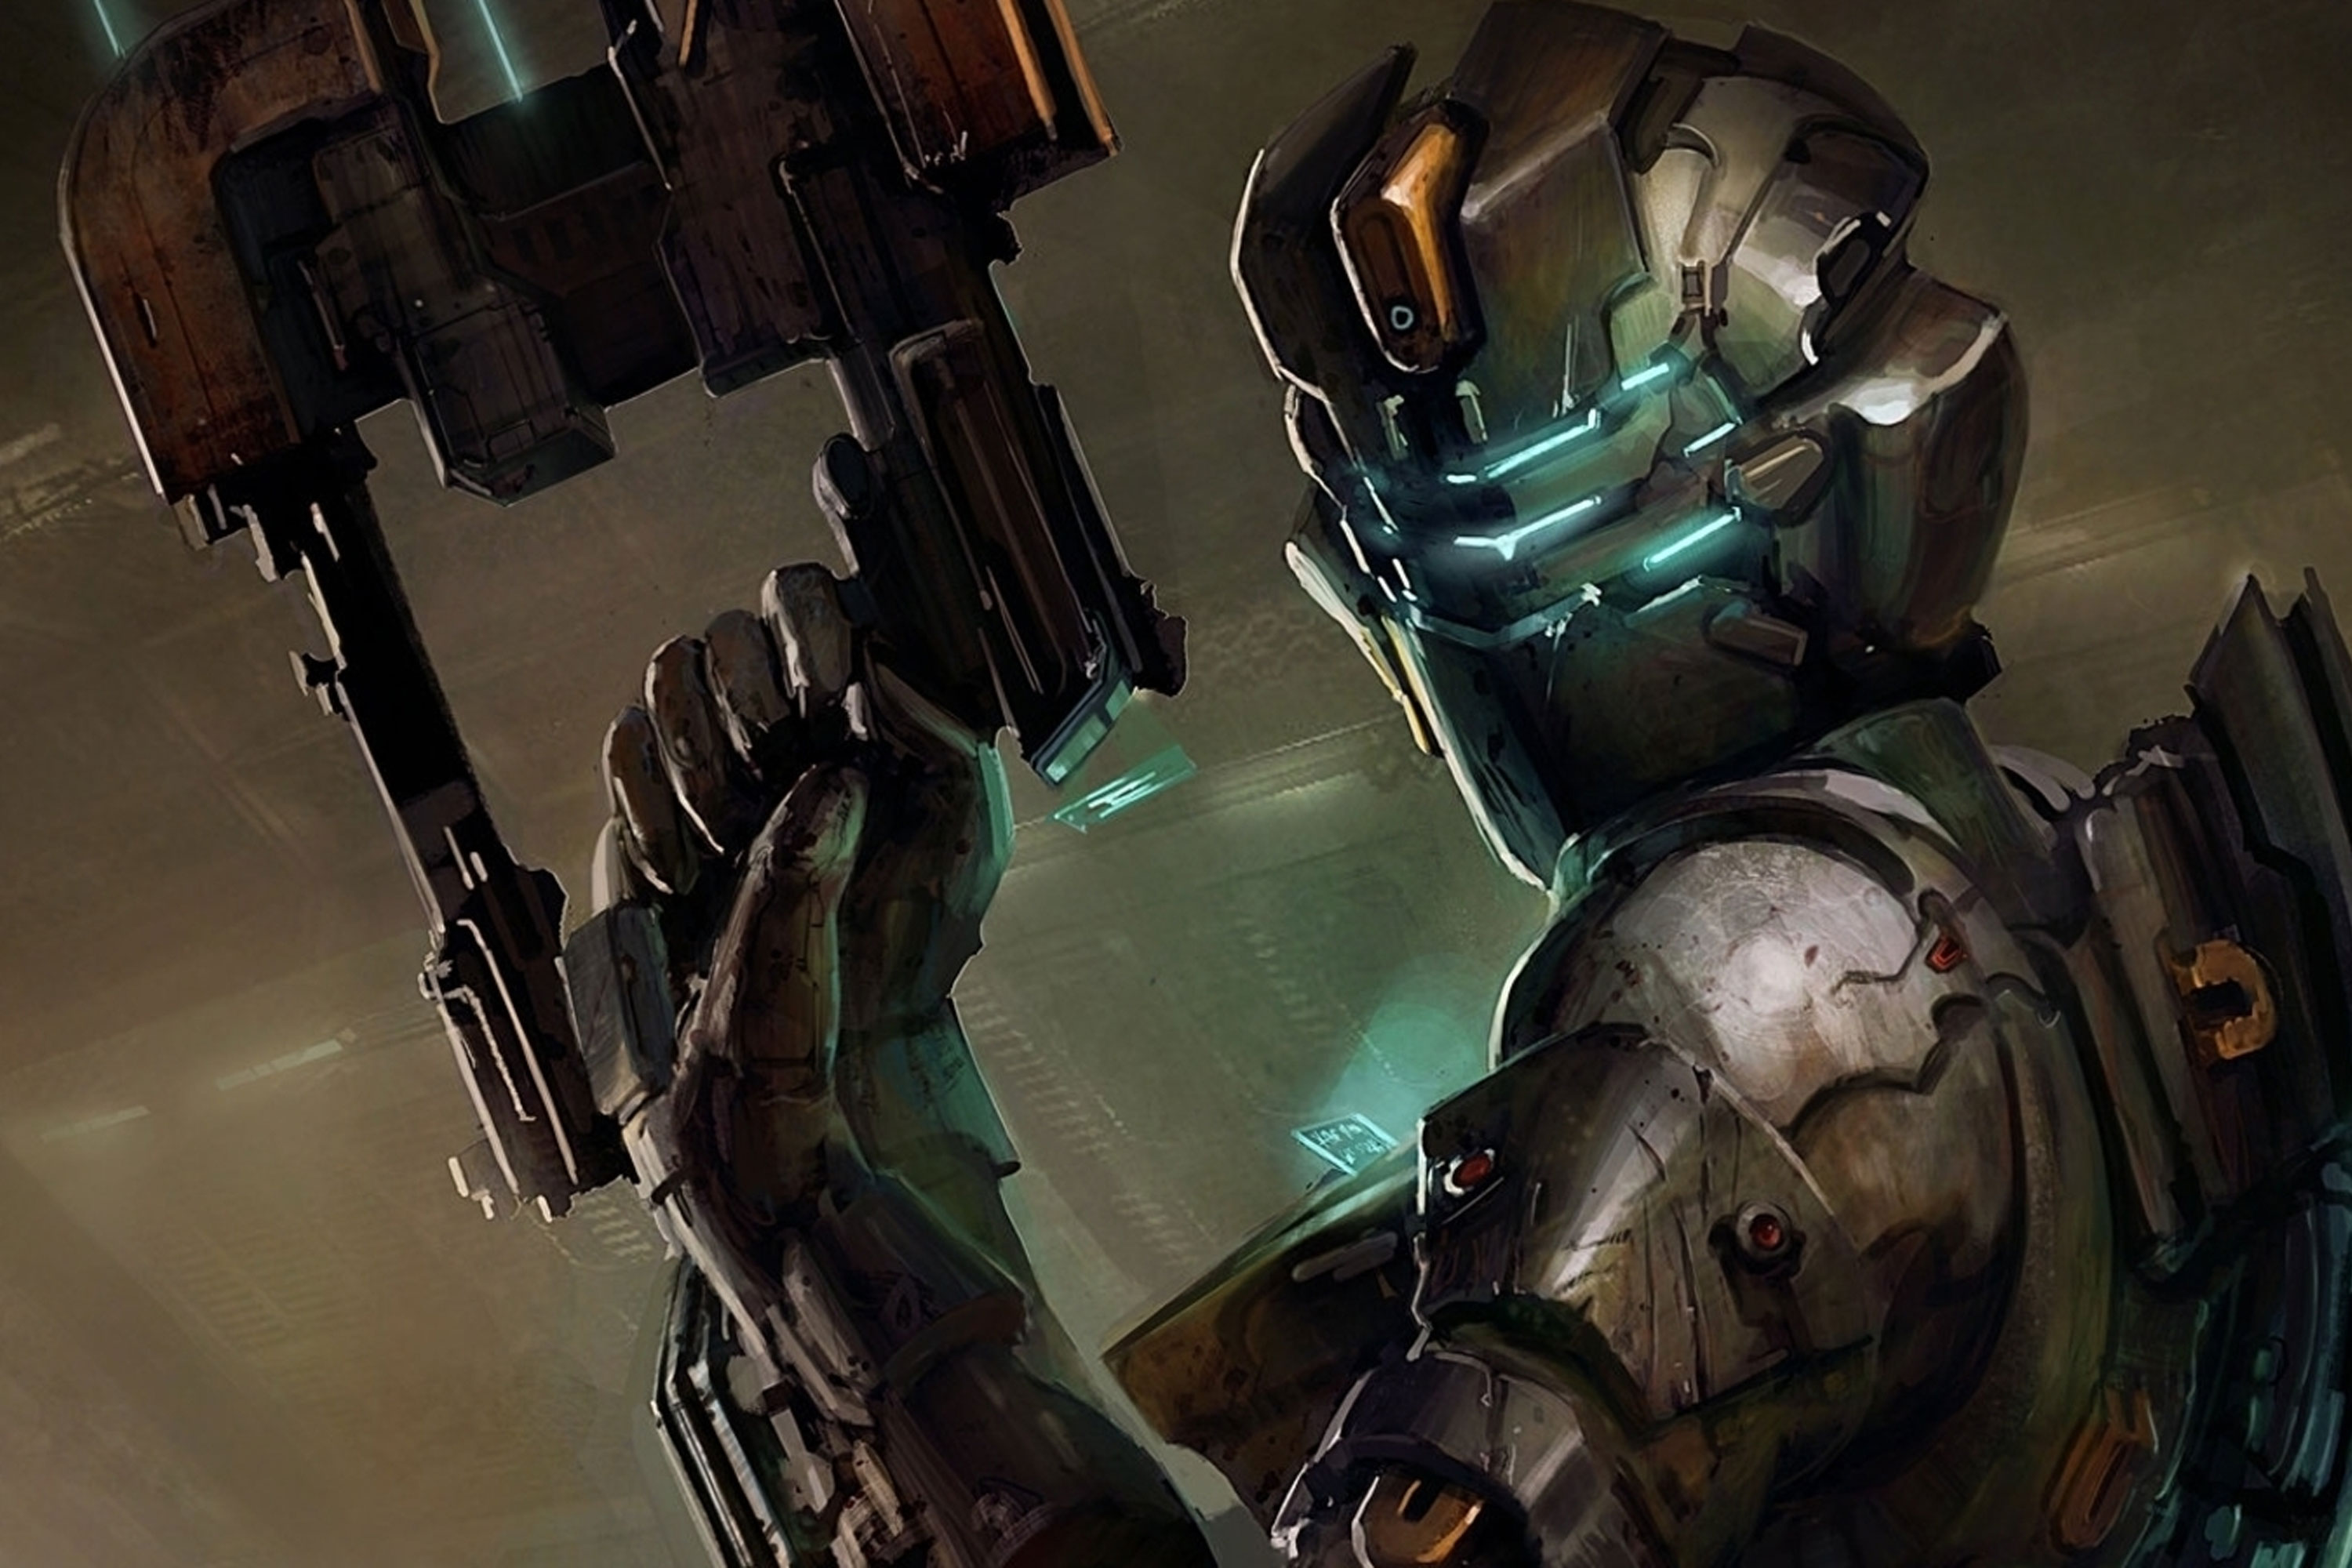 Dead Space developer would “love” to revisit the series – WORDS ABOUT GAMES